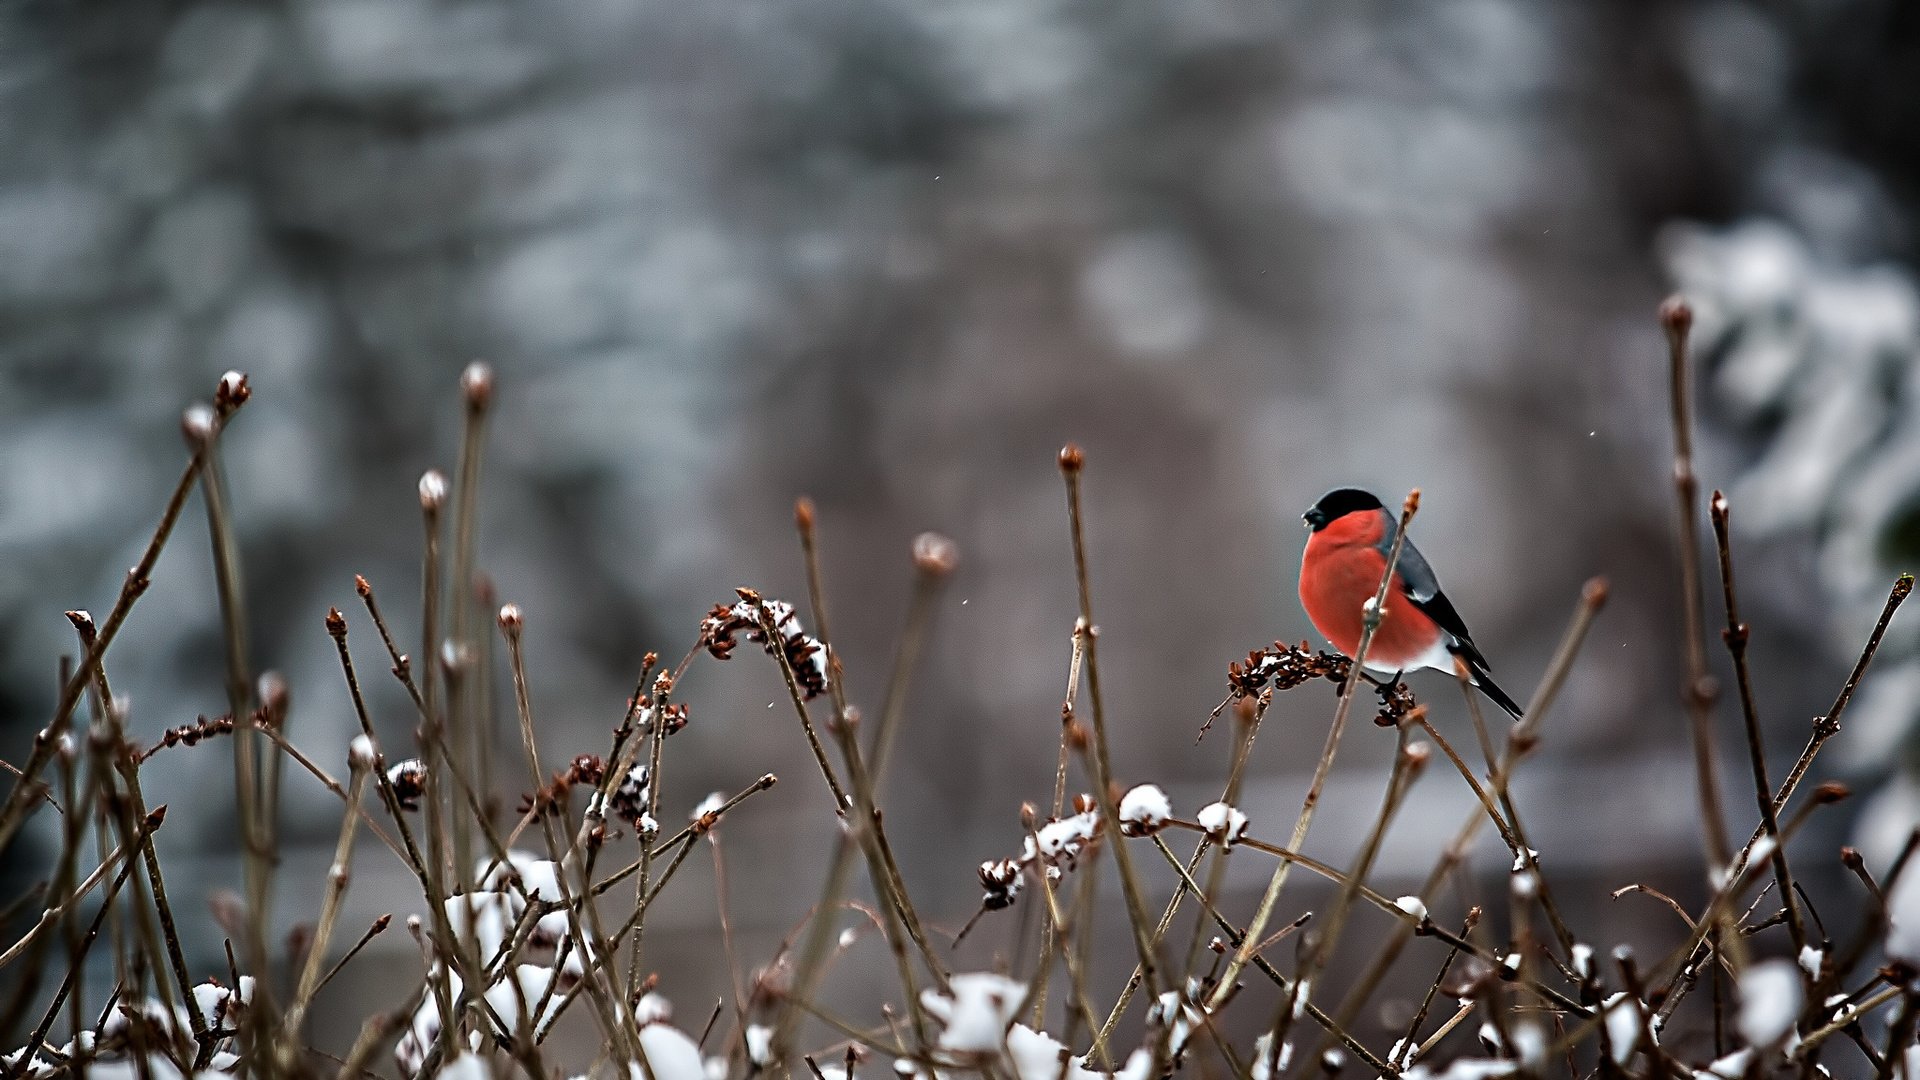 snow branches bird red animal winter snow nature wallpaper background